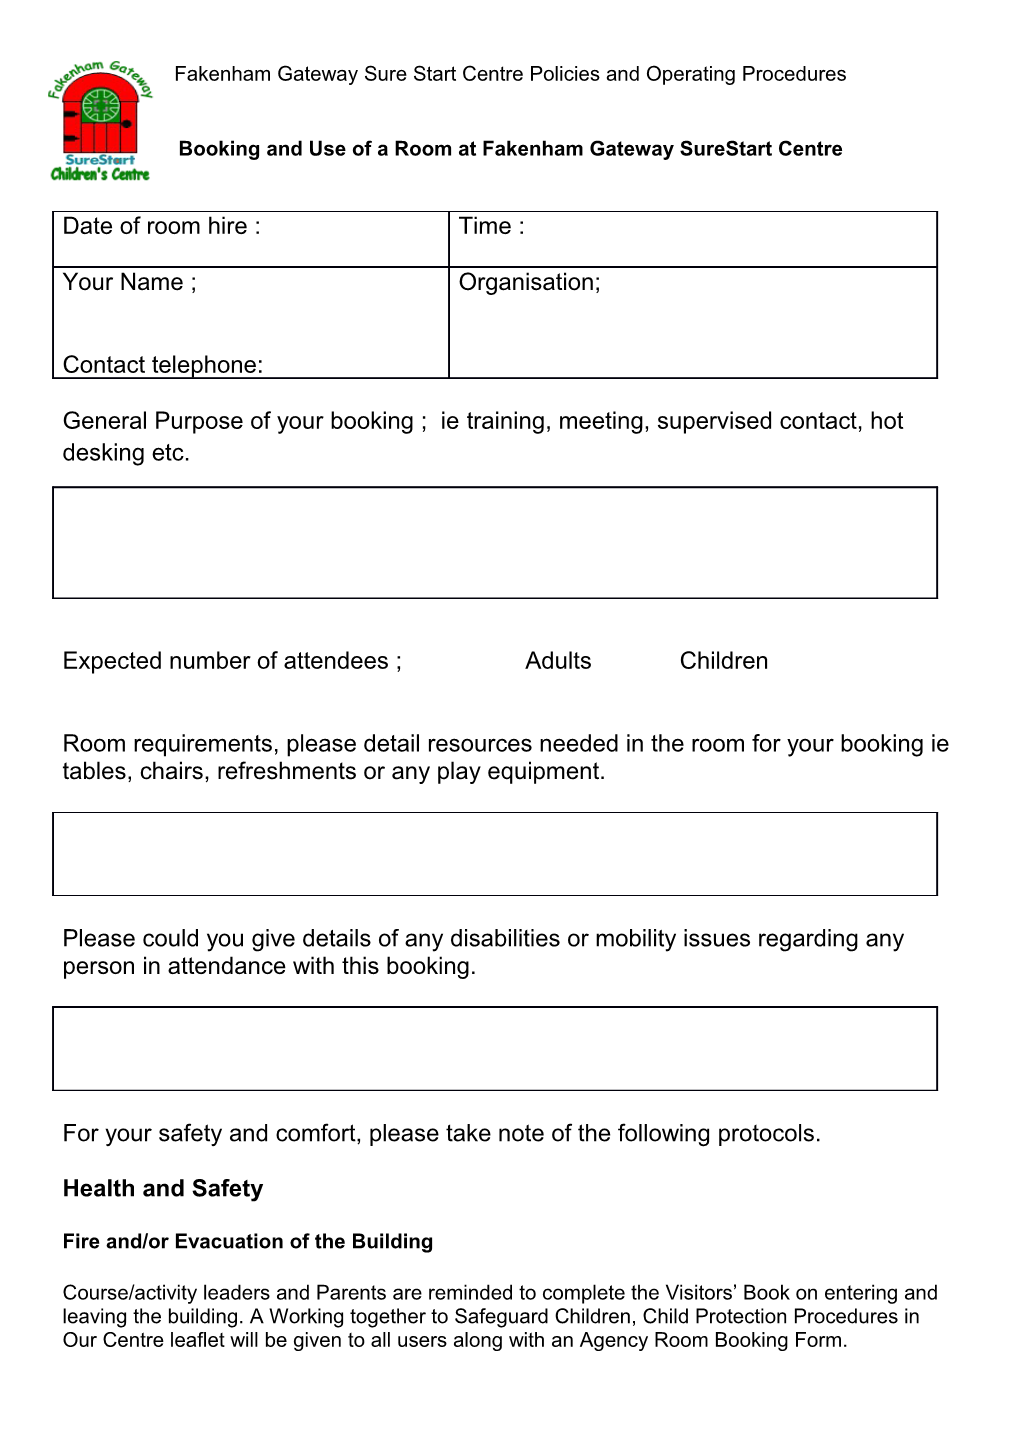 Booking and Use of a Room at Fakenham Gateway Surestart Centre